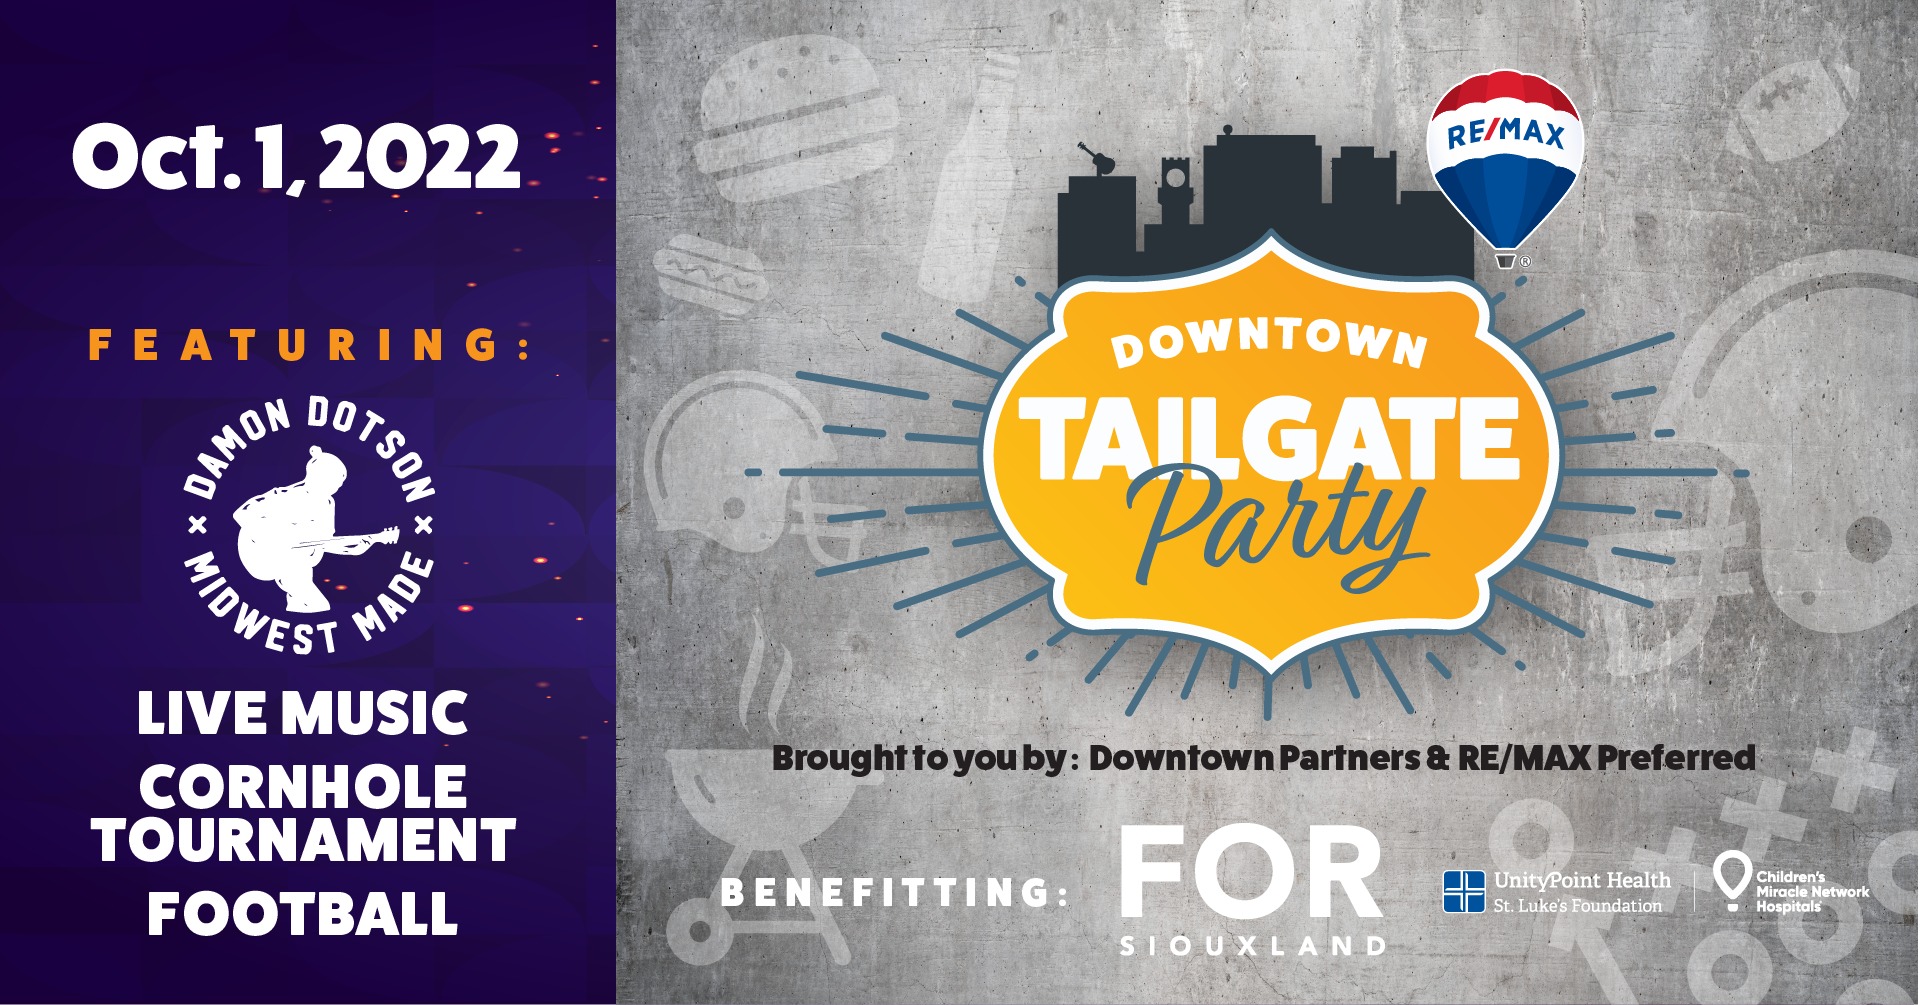 Downtown Tailgate Party Coming This Fall!